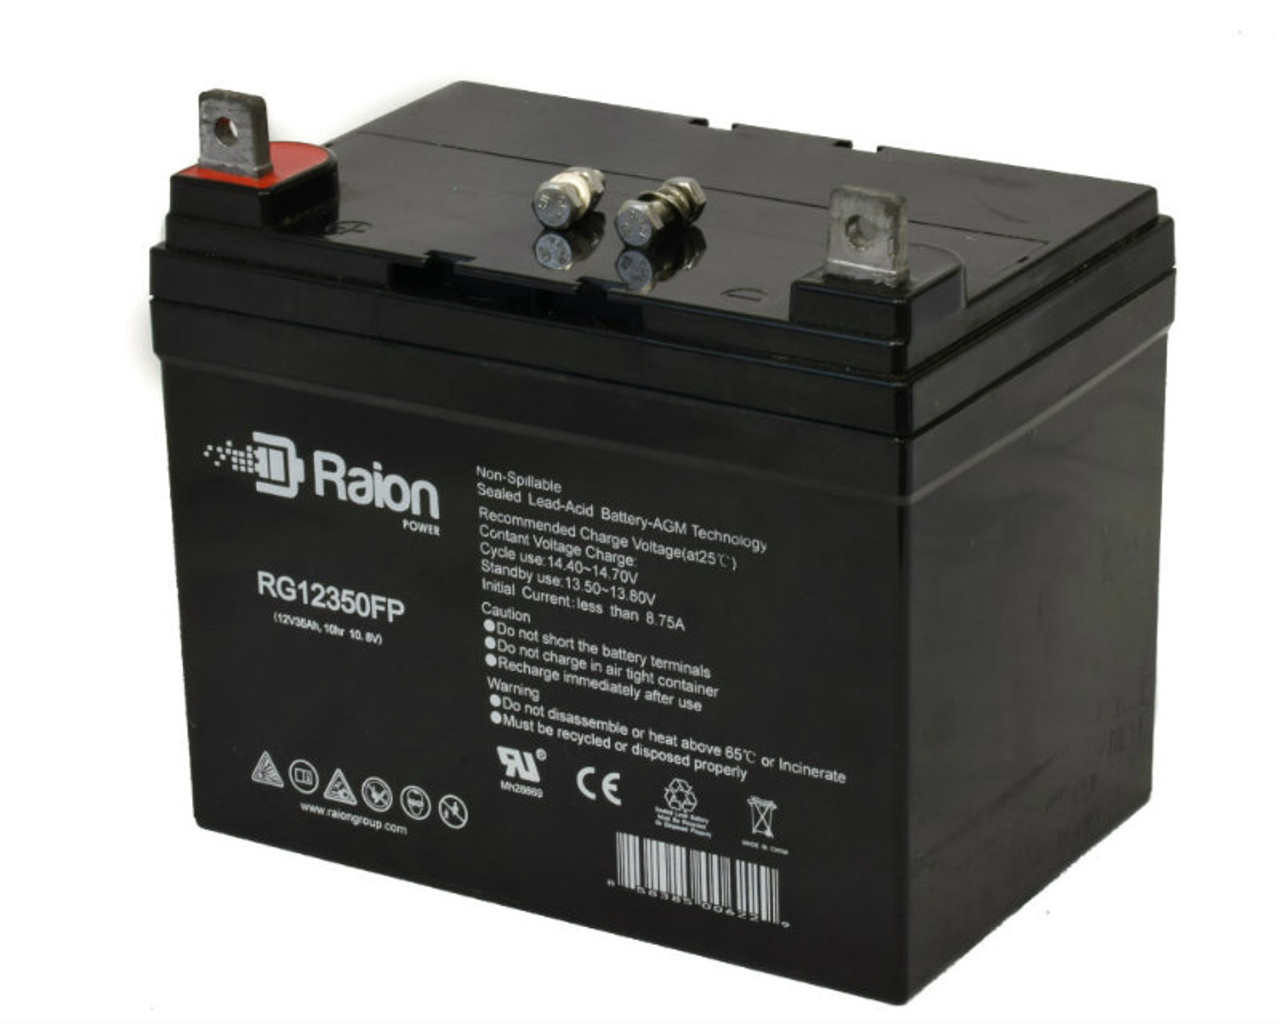 Raion Power Replacement 12V 35Ah Battery for Origin OR-12350B - 1 Pack